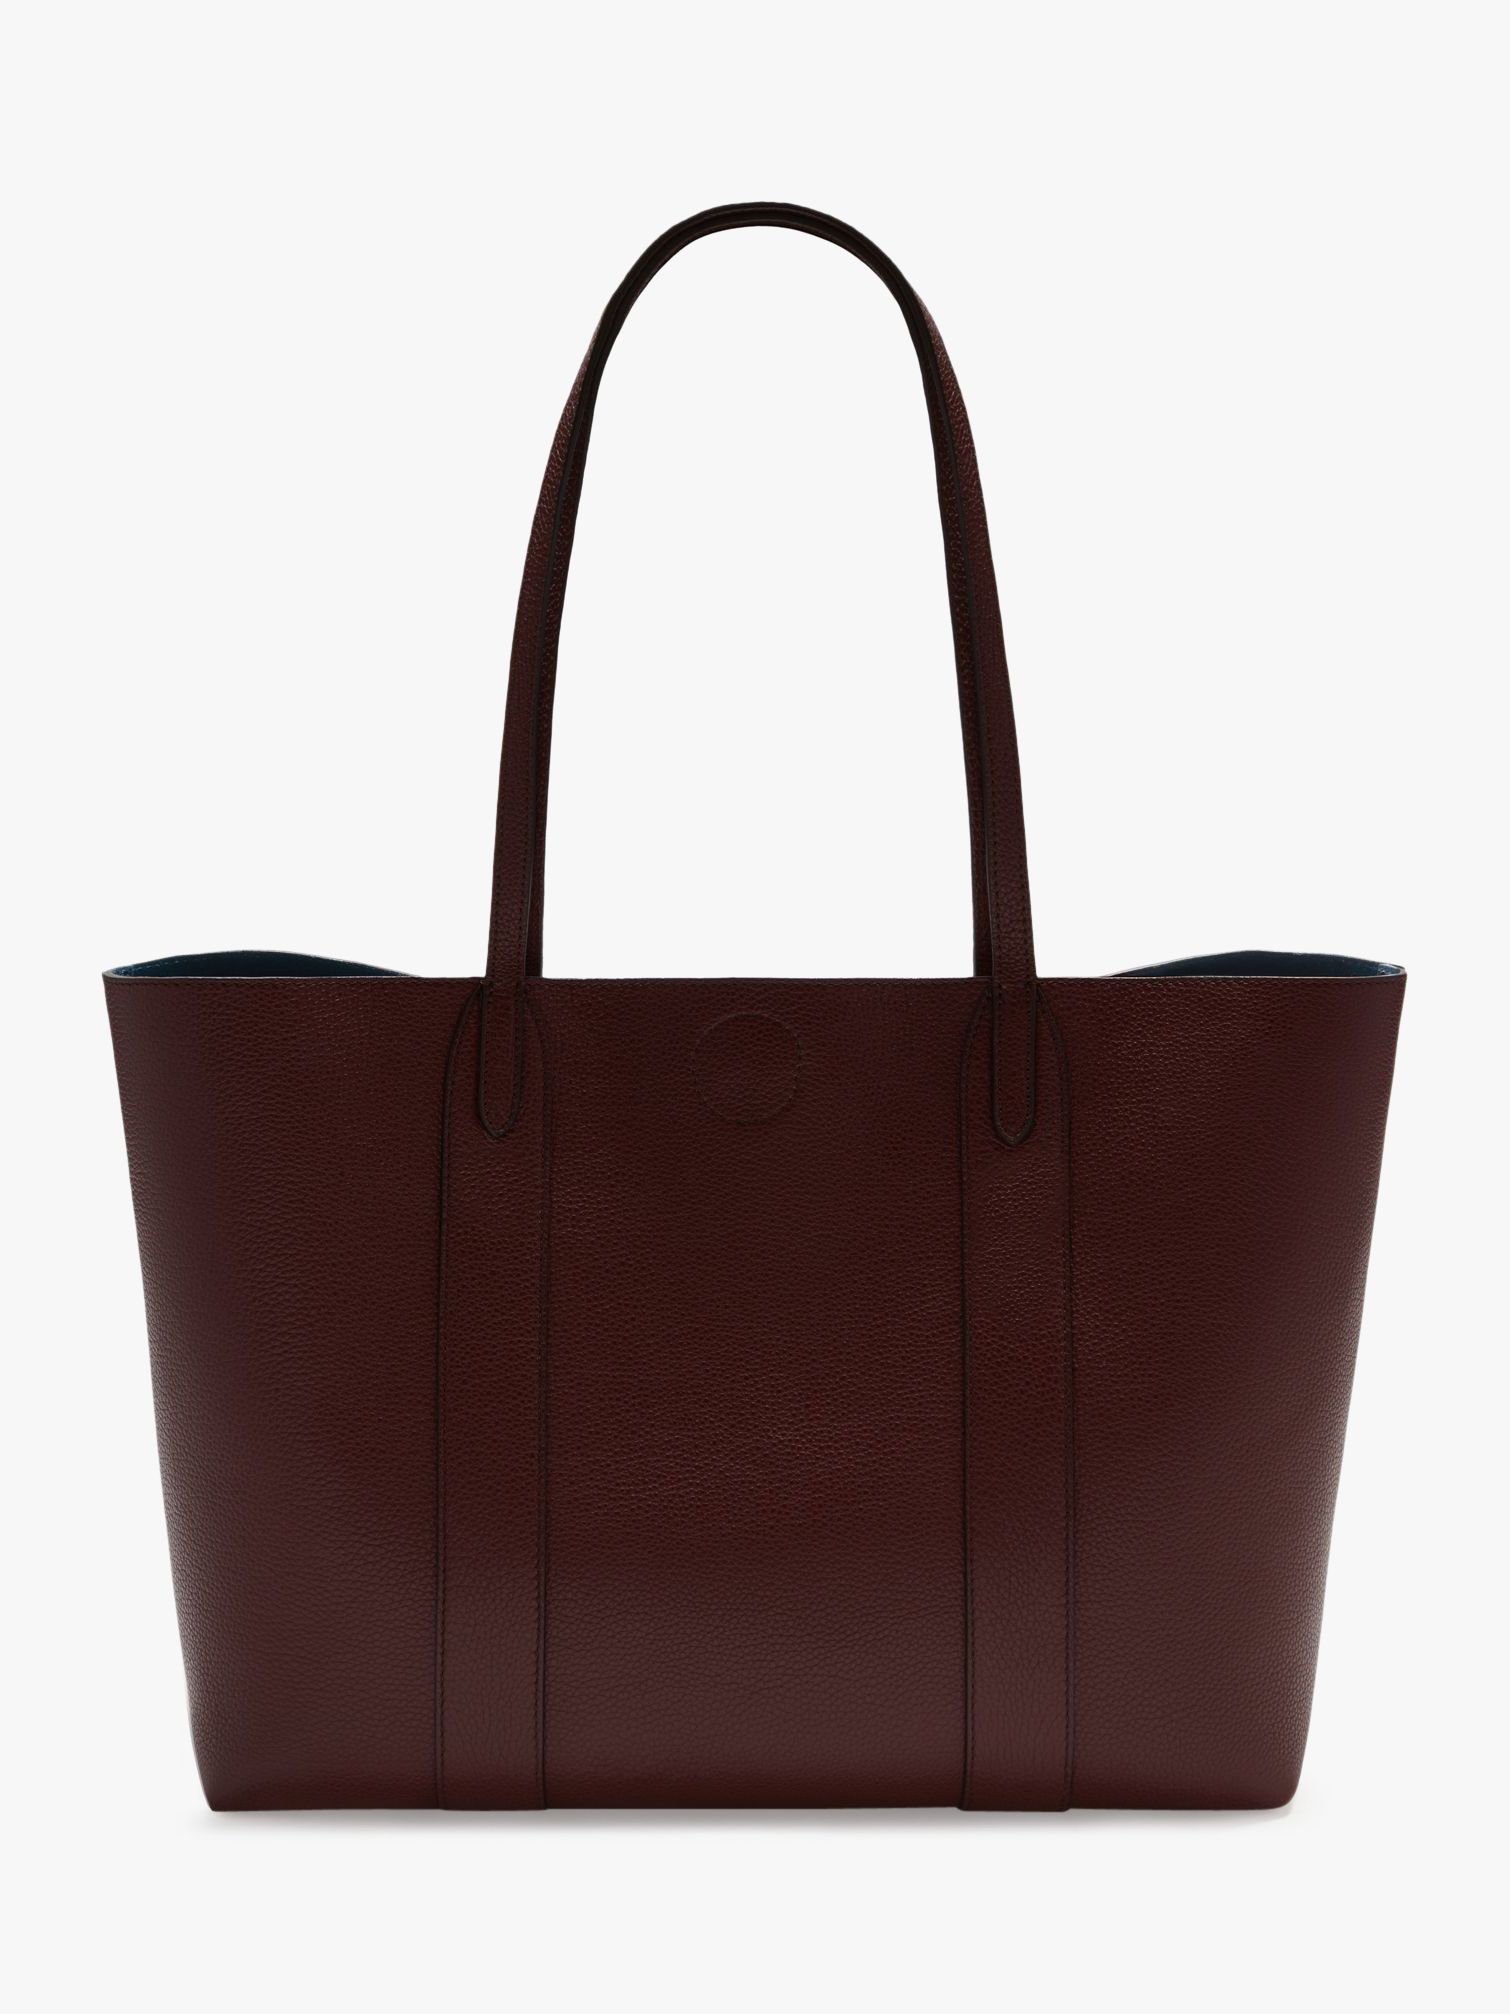 Mulberry Bayswater Small Classic Grain Leather Tote Bag at John Lewis ...